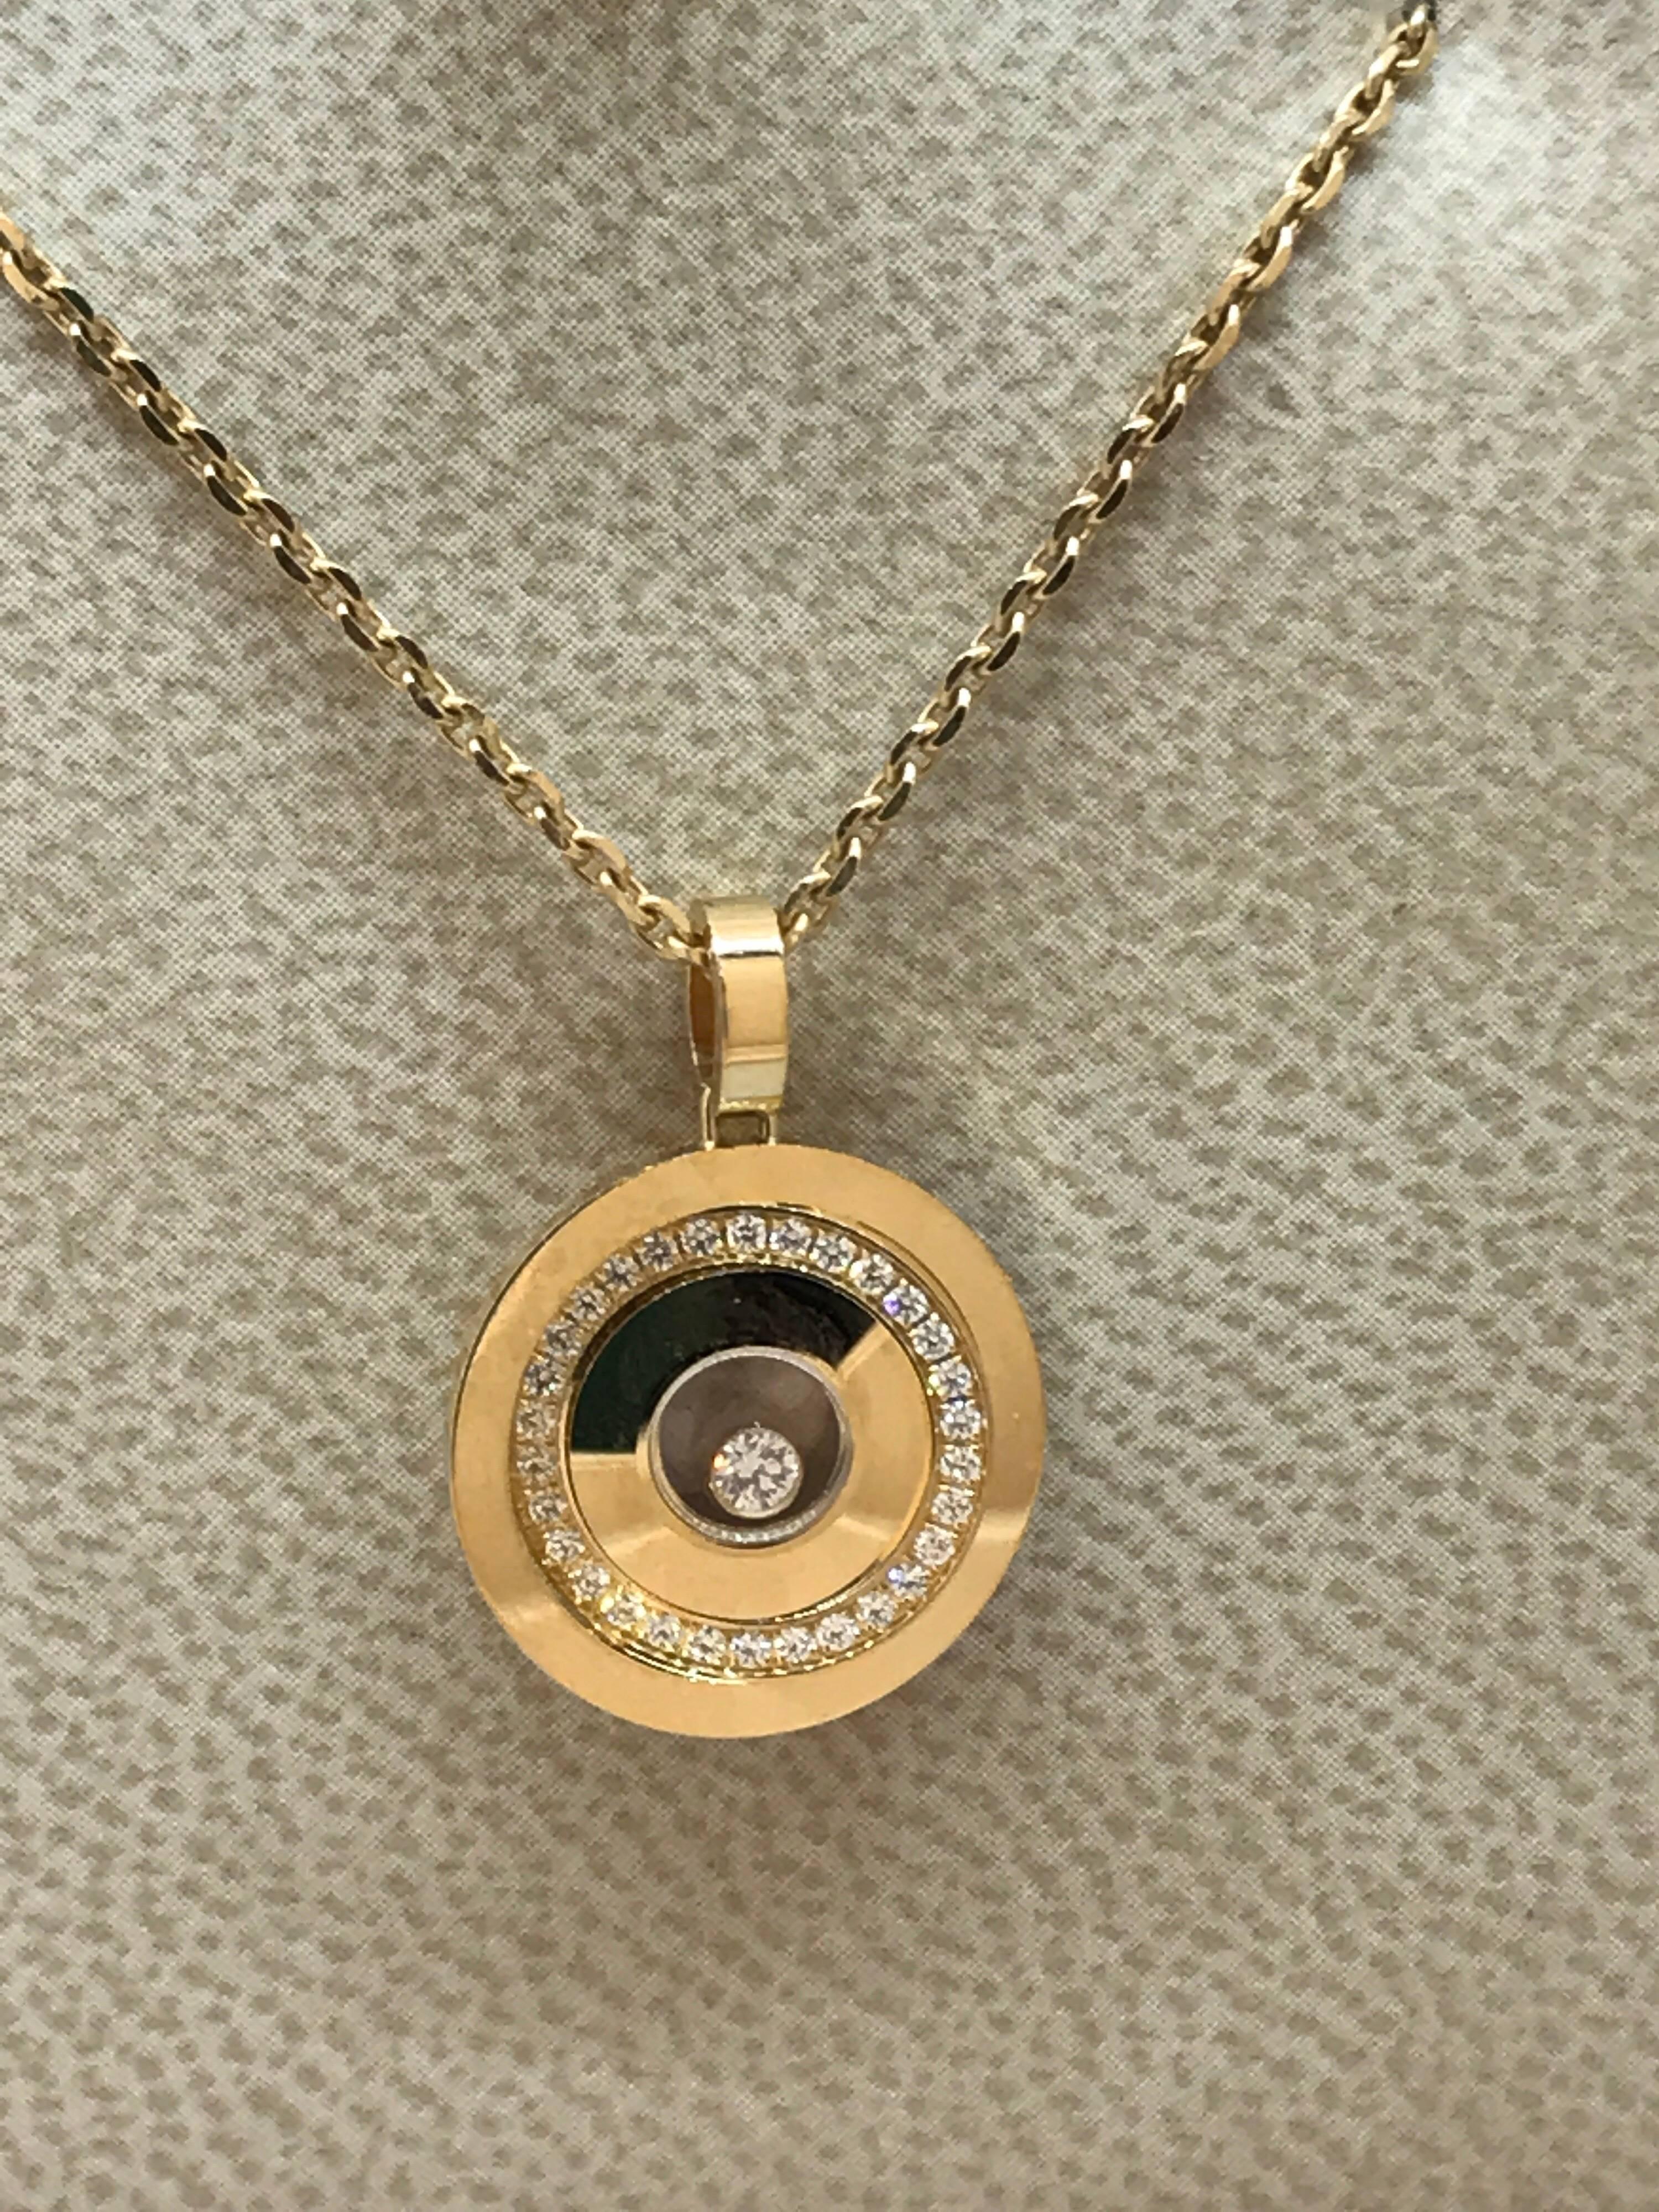 Chopard Happy Spirit Round Circle Pendant / Necklace

Model Number: 79/7990-0003

100% Authentic

Brand New

Comes with original Chopard box, certificate of authenticity and warranty, and jewels manual

18 Karat Yellow Gold (8.30gr)

30 Diamonds on